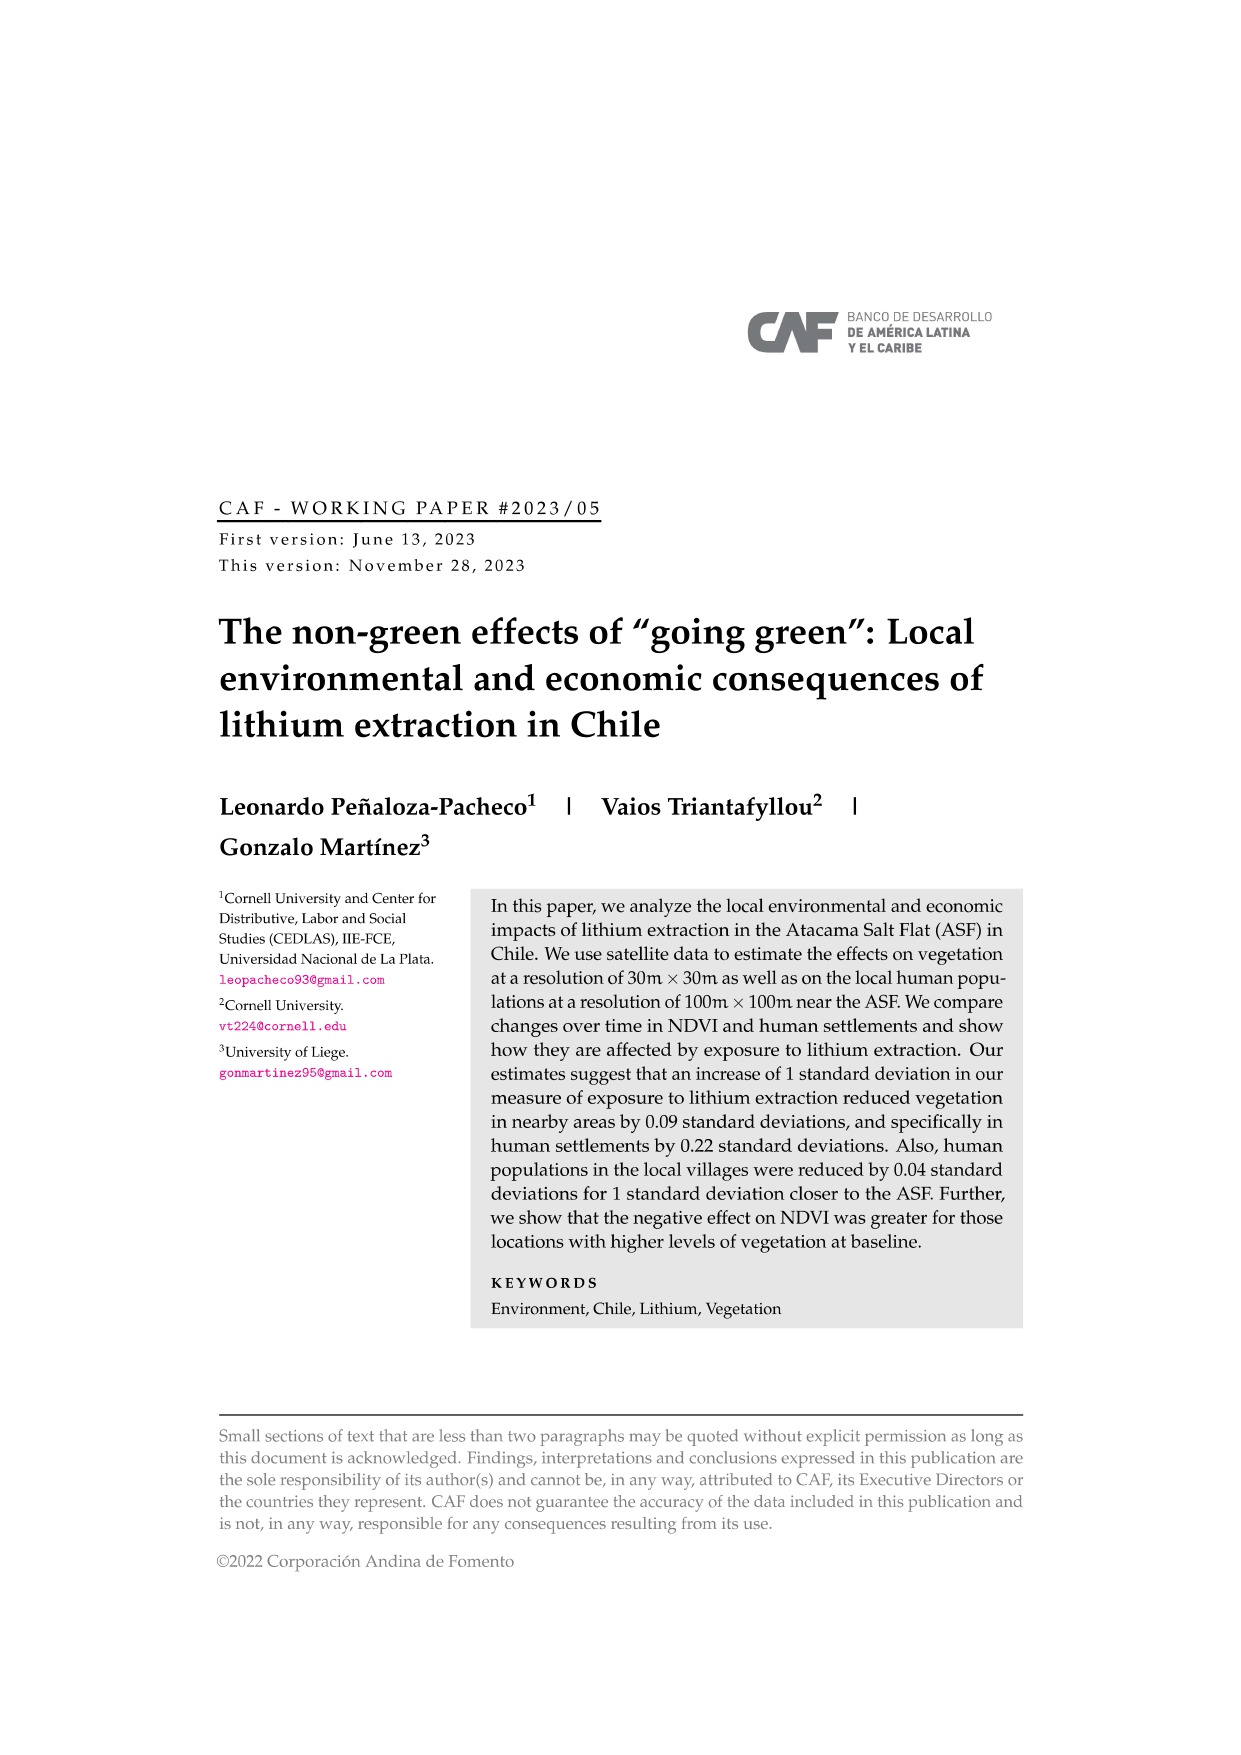 The non-green effects of “going green”: Local environmental and economic consequences of lithium extraction in Chile